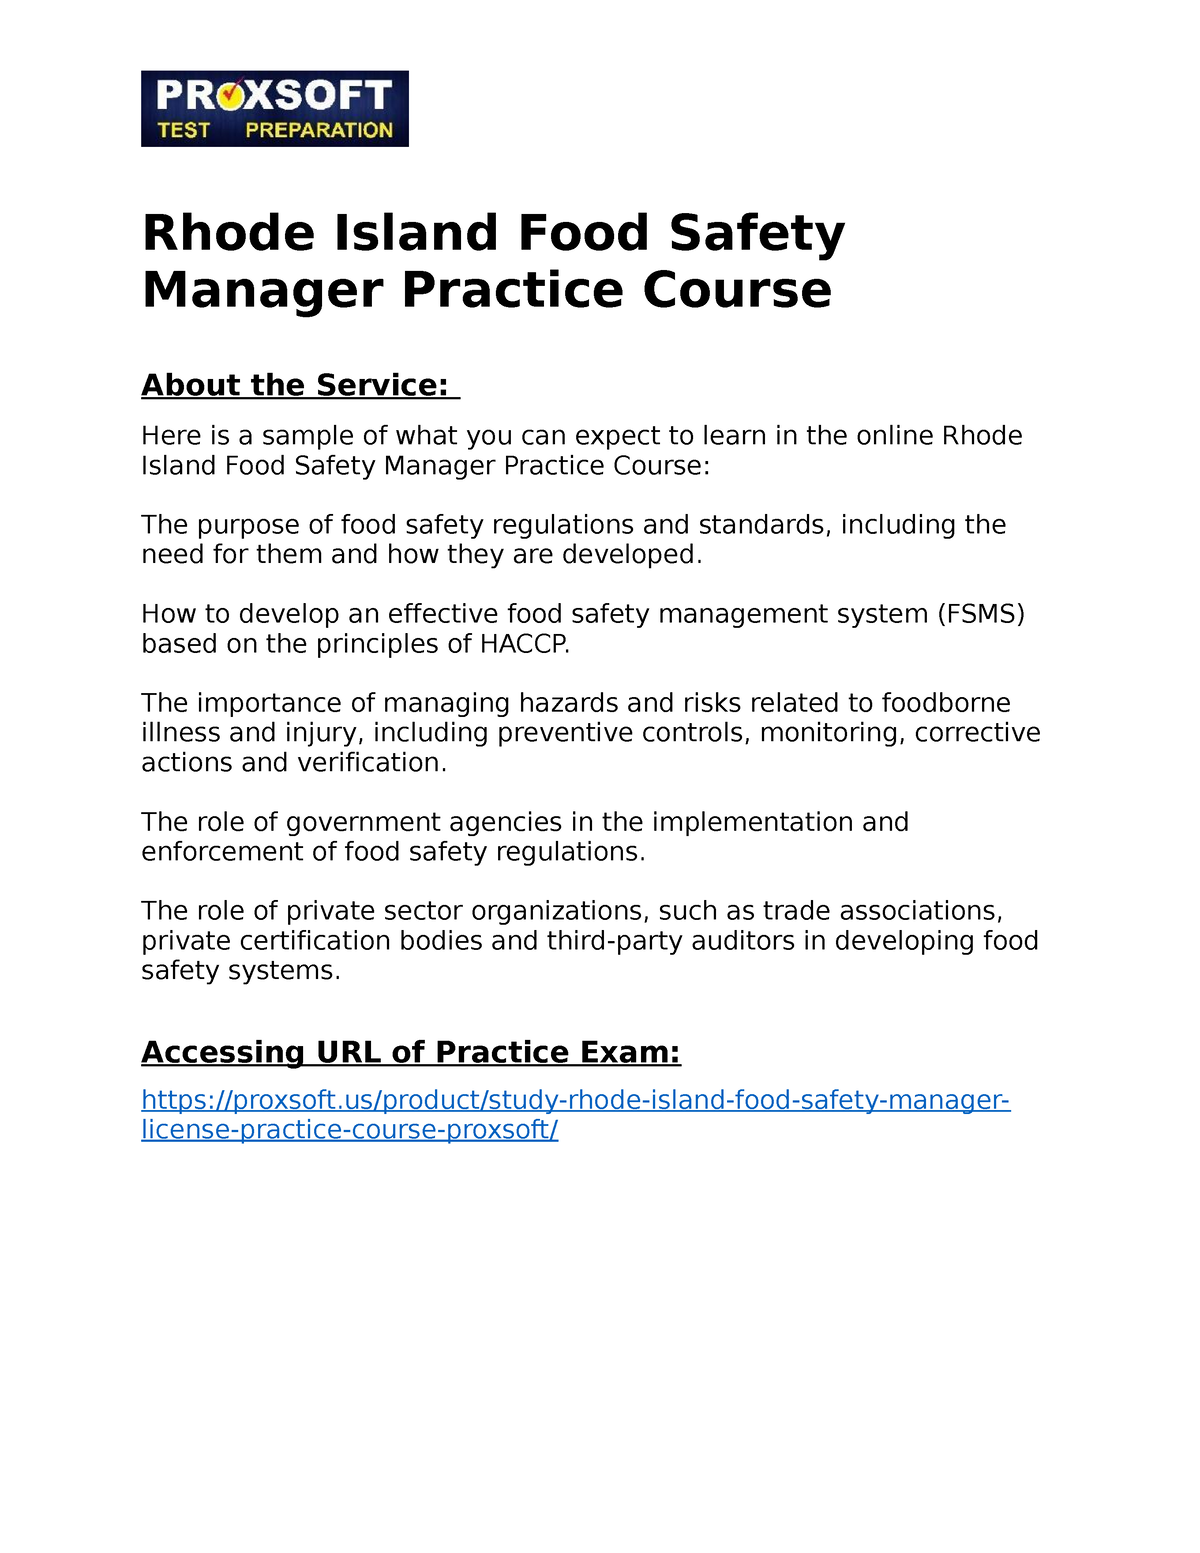 Rhode Island Food Safety Manager Practice Course Rhode Island Food